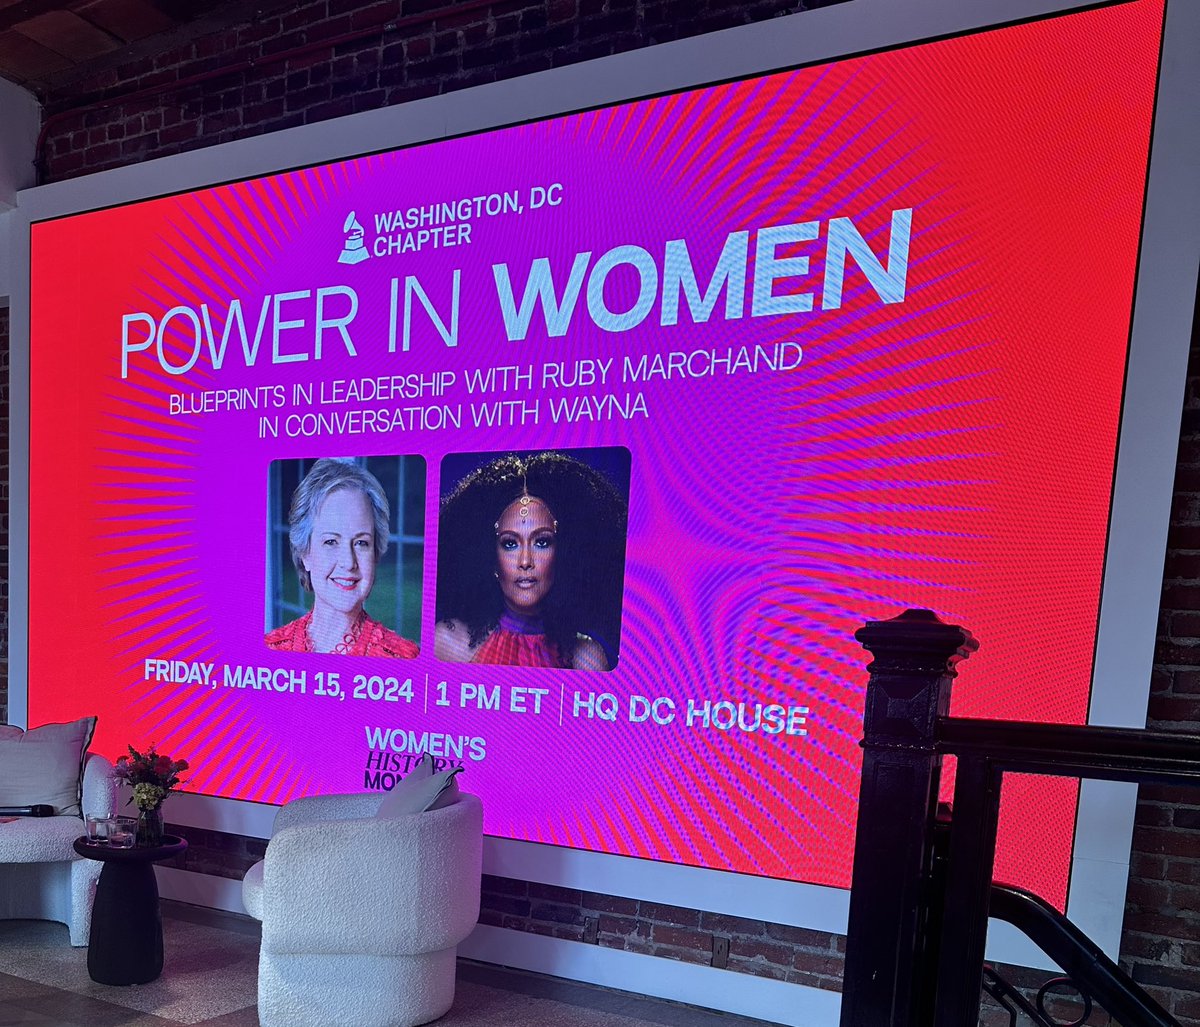 Today, I attended 'The Power In Women - Blueprints in Leadership with Ruby Marchand in conversation with Wayna' at HQ DC House. The event was sponsored by the DC Chapter of The Recording Academy!! Recording Academy / GRAMMYs